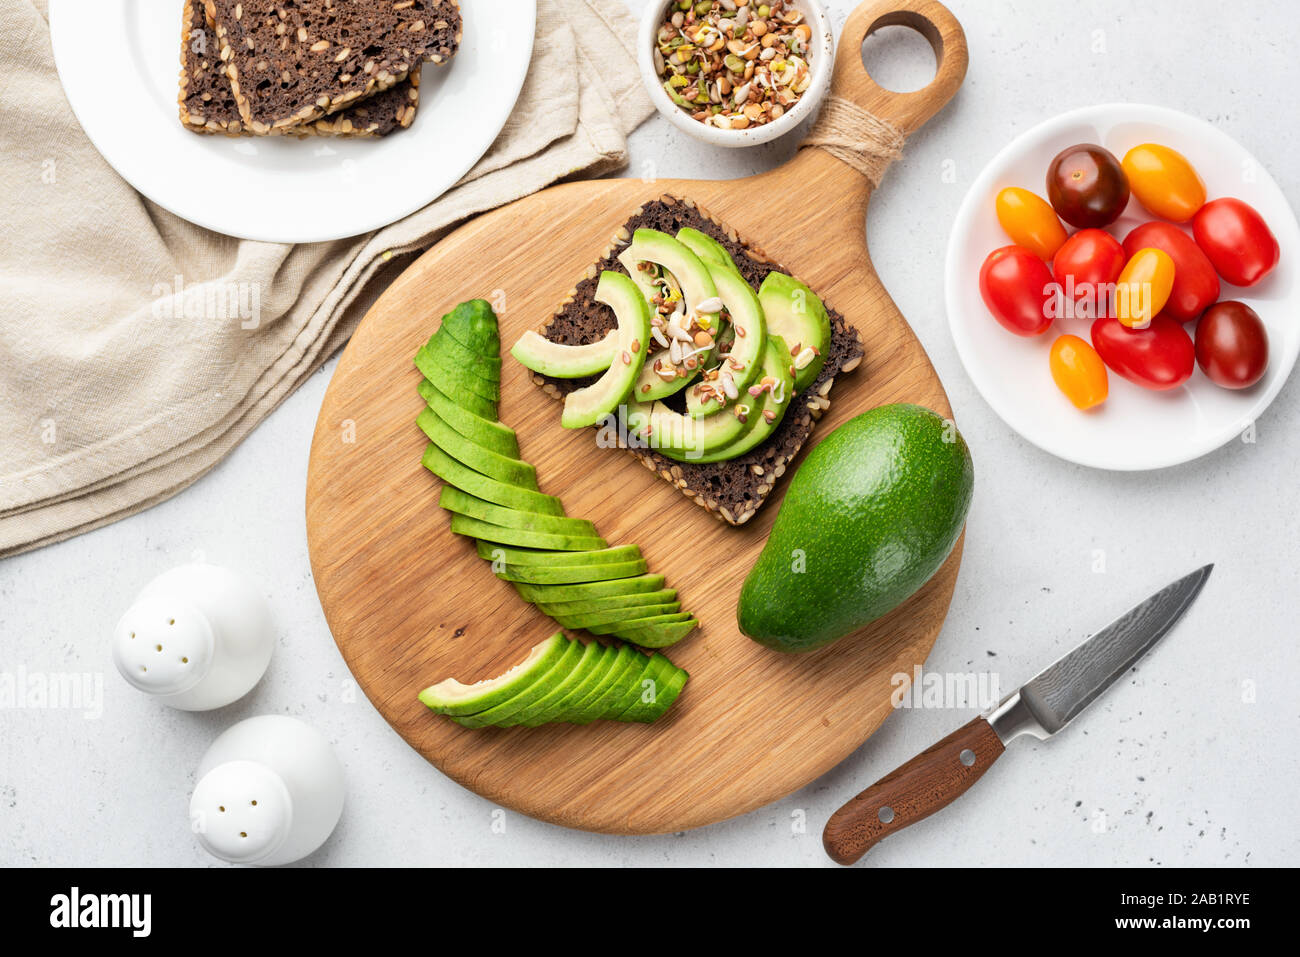 Healthy Toast With Avocado Rye Bread And Sprouts On Wooden Board. Top View. Clean Eating, Dieting, Weight Loss Food Concept Stock Photo